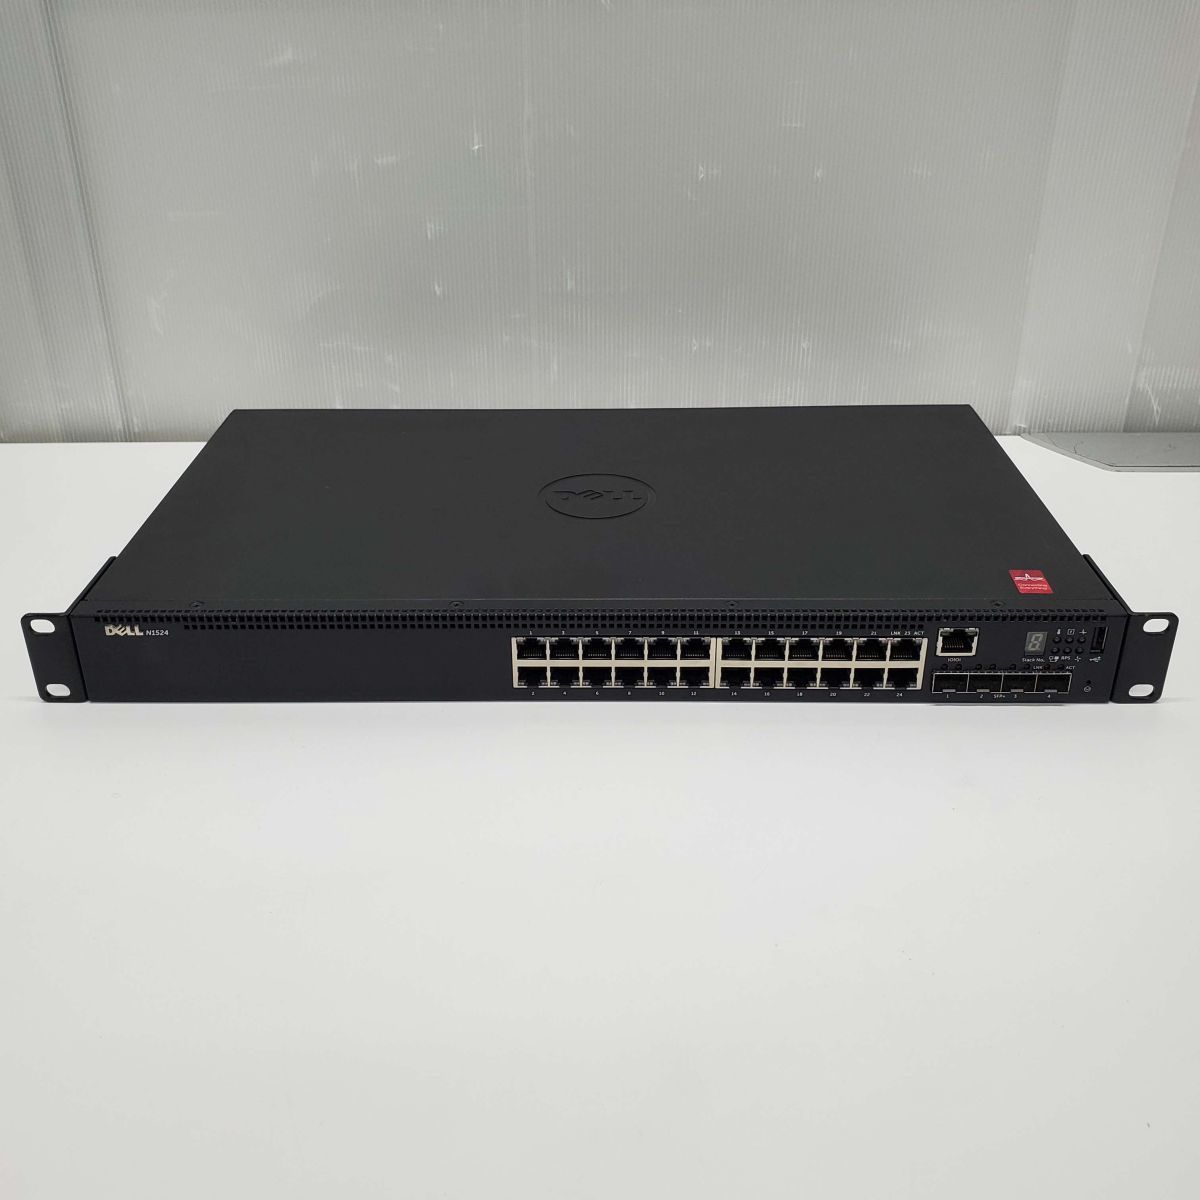 ＠T0666【初期化済み】DELL N1524 Model:E15W Networking N1500 Series Switch RJ45:24ポート SFP+:4ポート